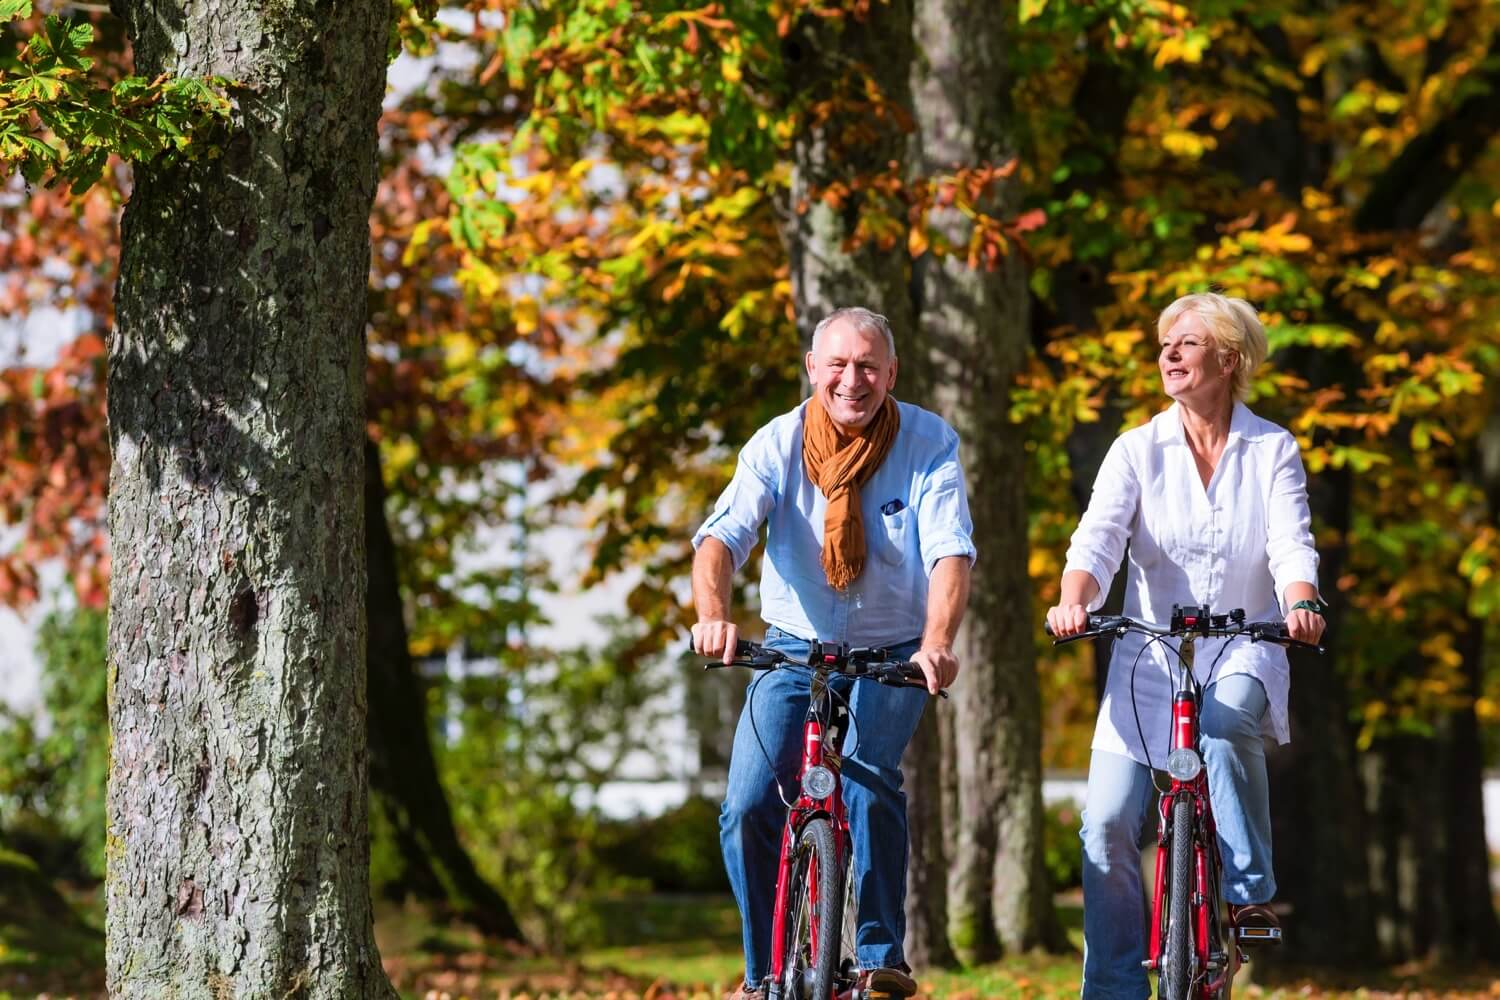 Two seniors on bicycles in a park